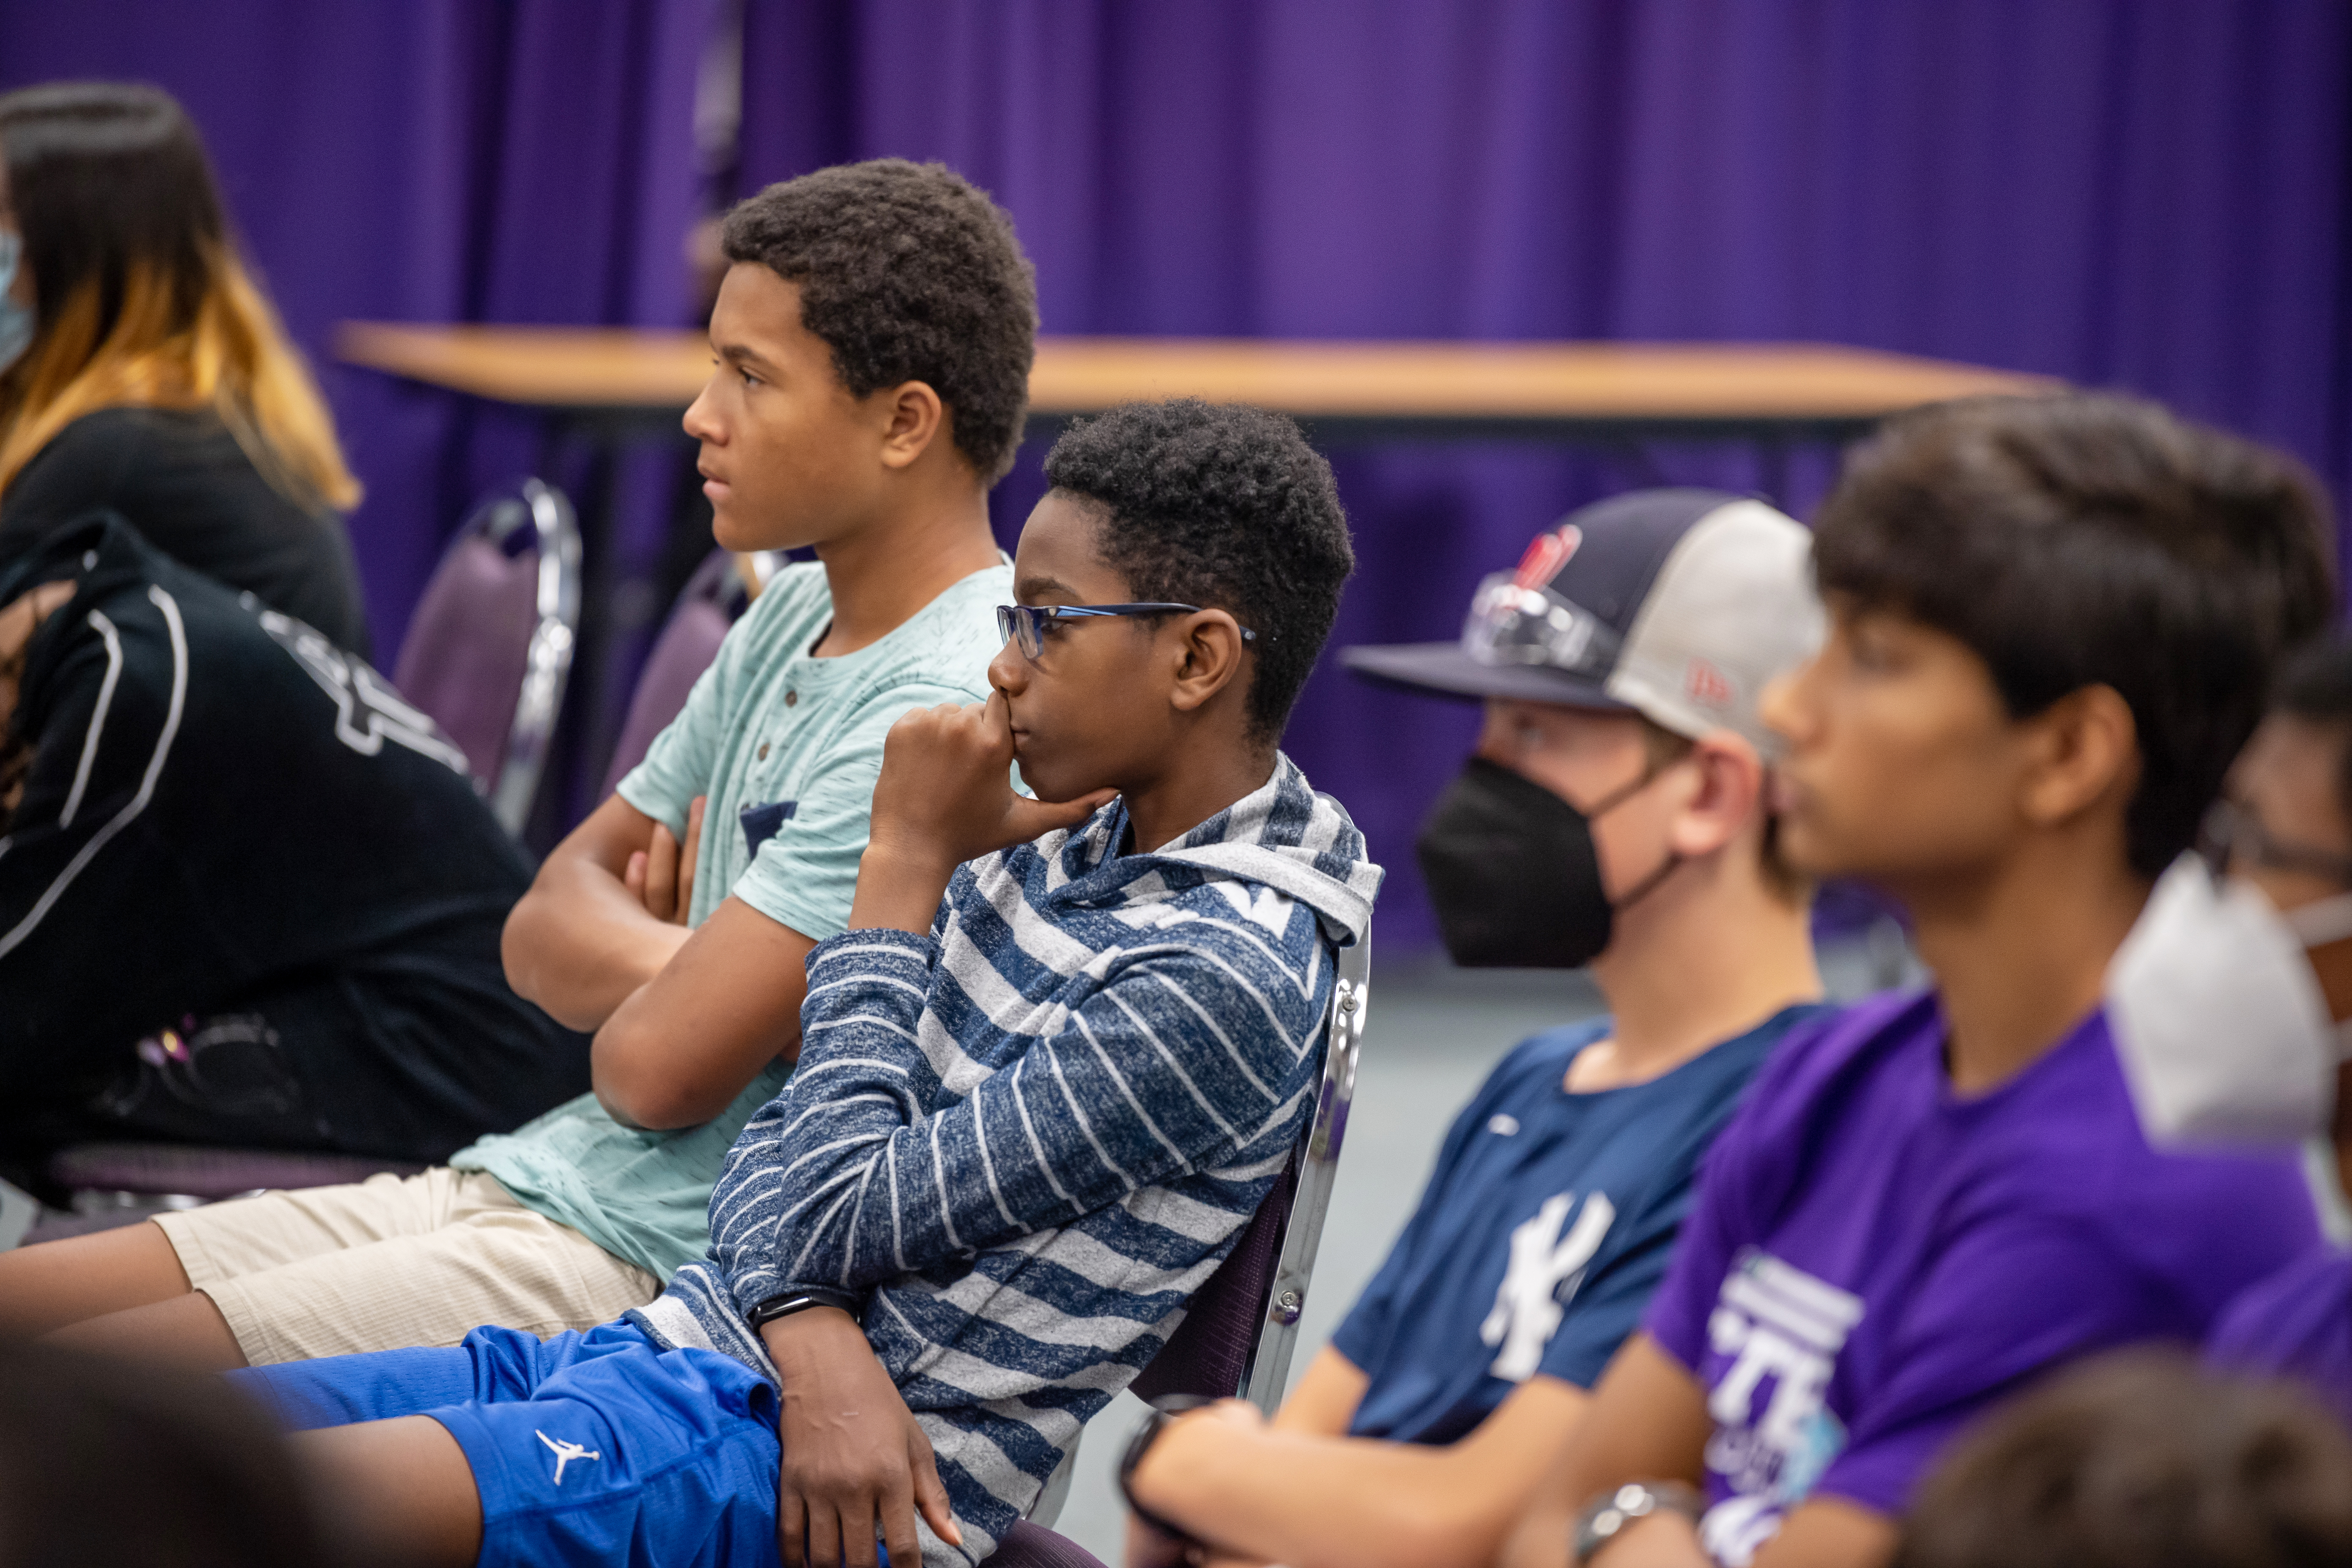 Students listen to the presentation of new NASA images. 